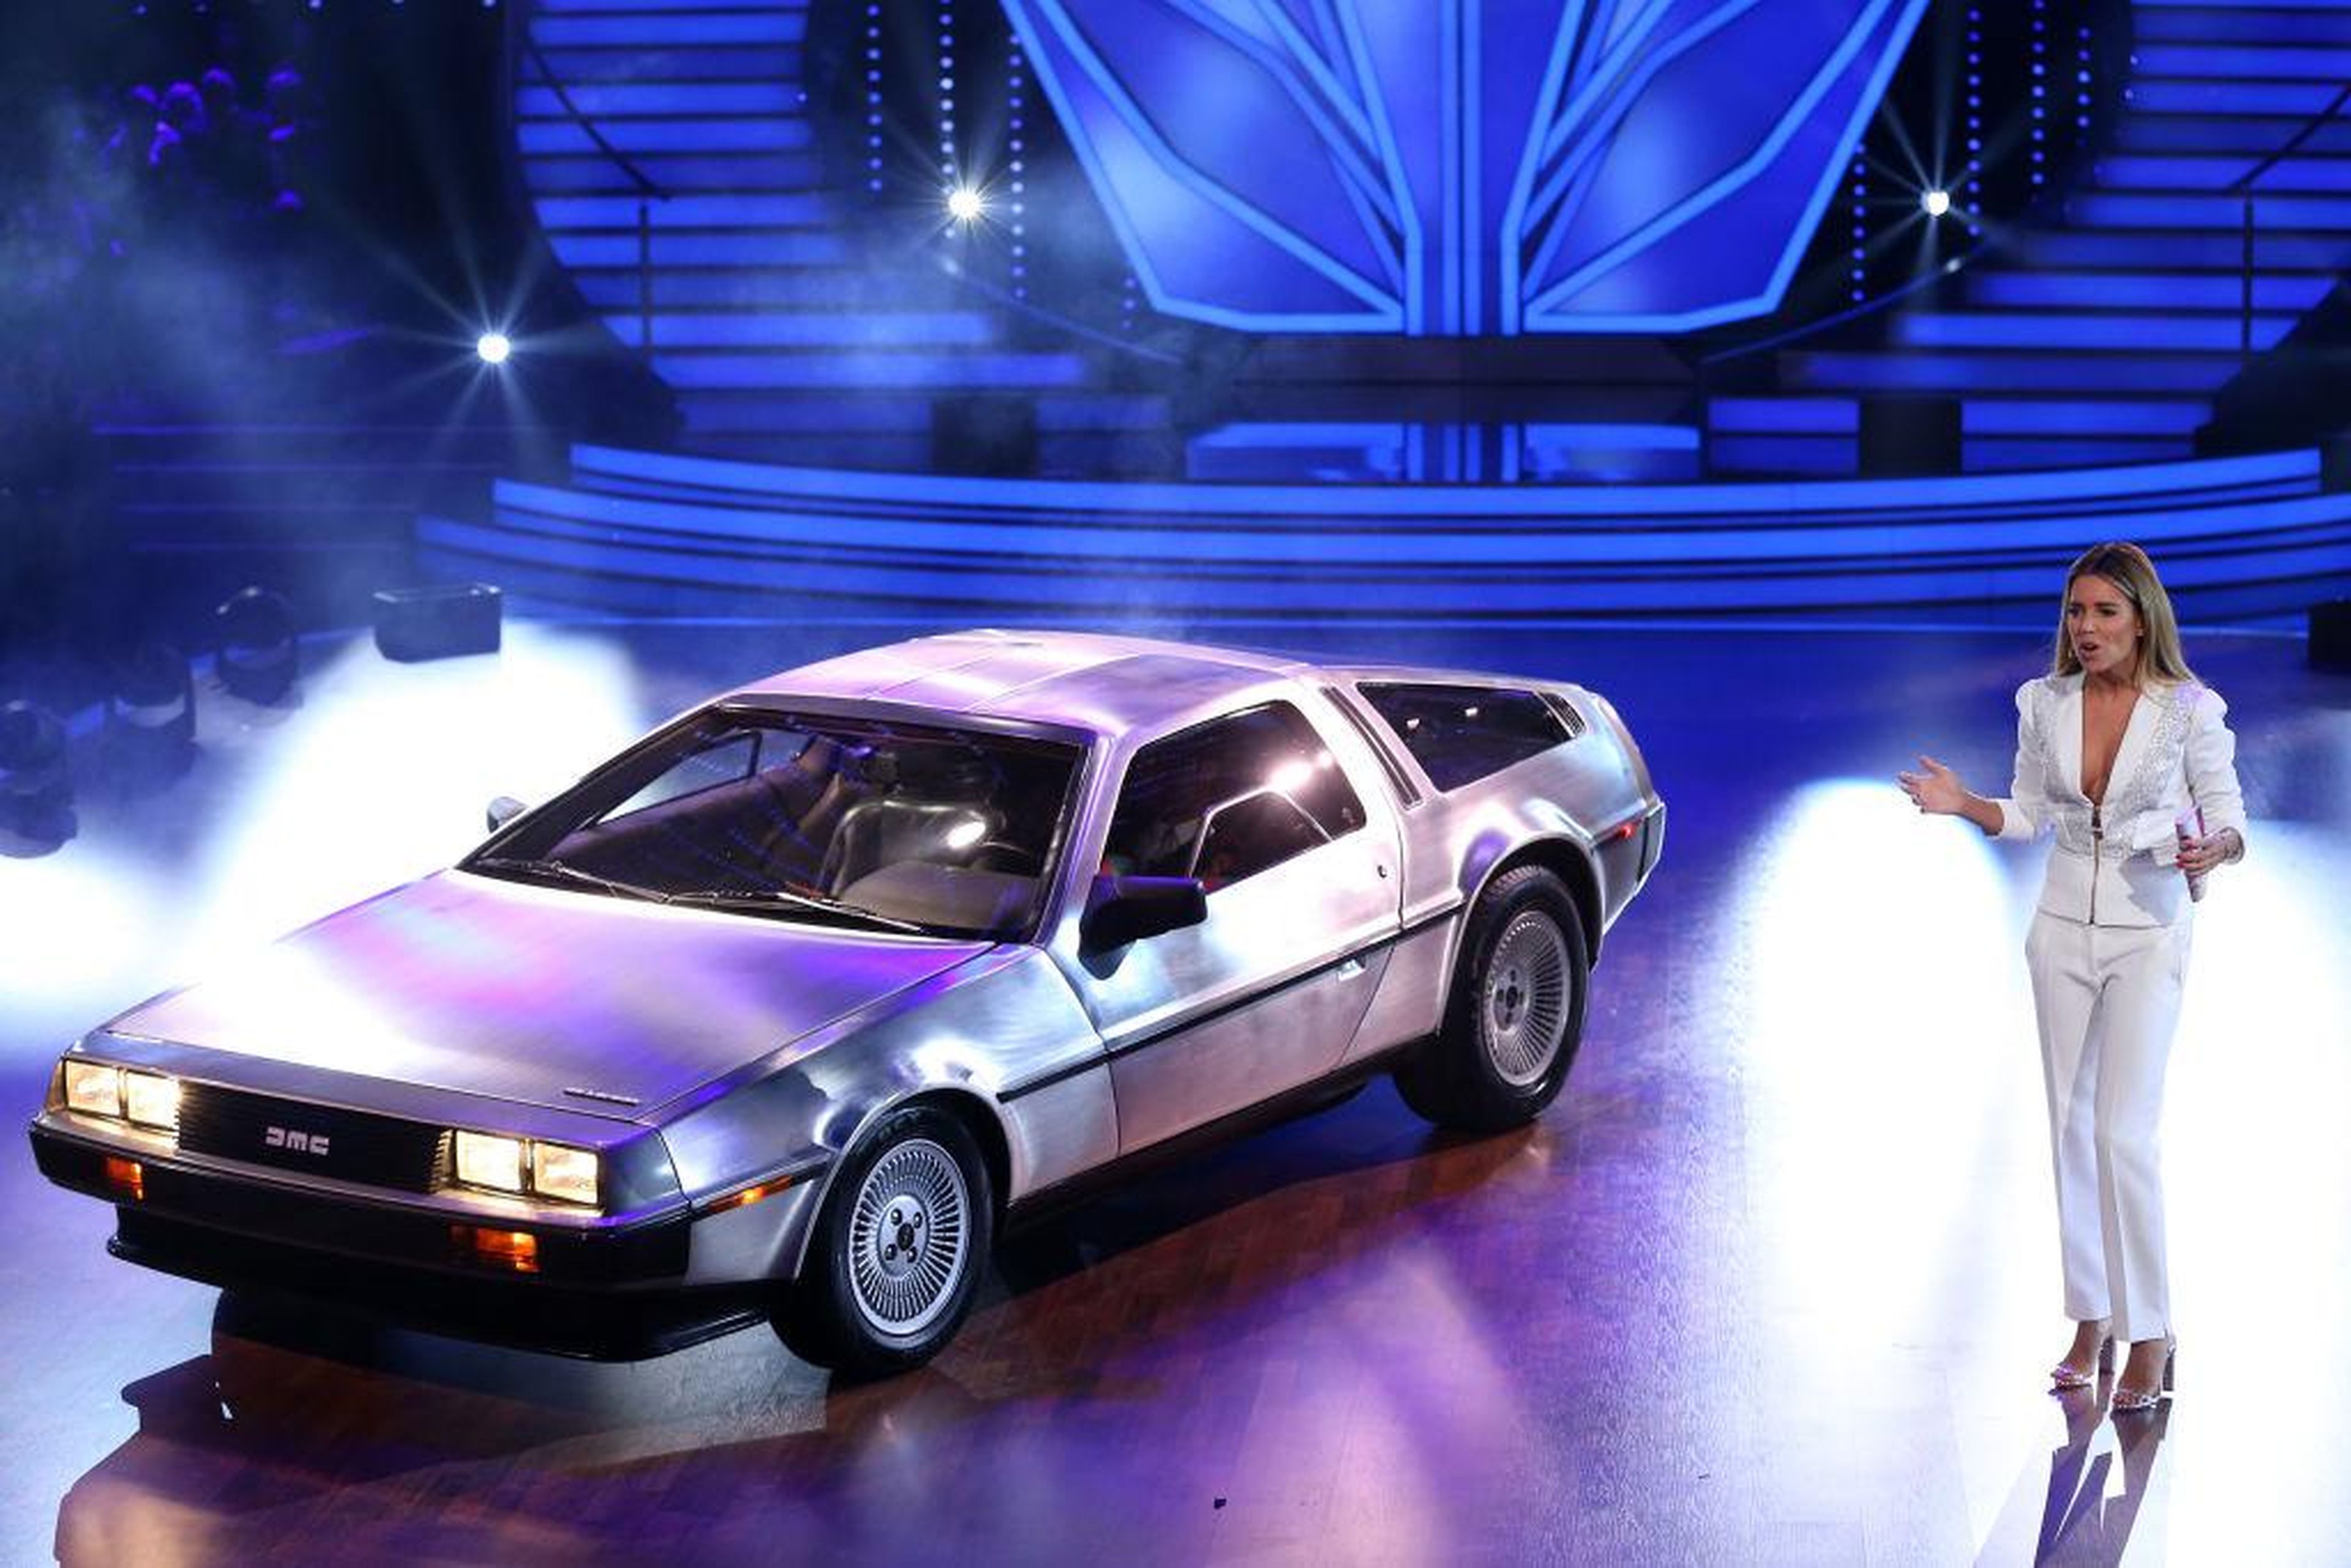 The DMC DeLorean. The infamous brainchild of John DeLorean, the stainless-steel-skinned car that bore his name hit the road for a brief time before a drug bust and financial shenanigans killed the brand. It was renewed by the